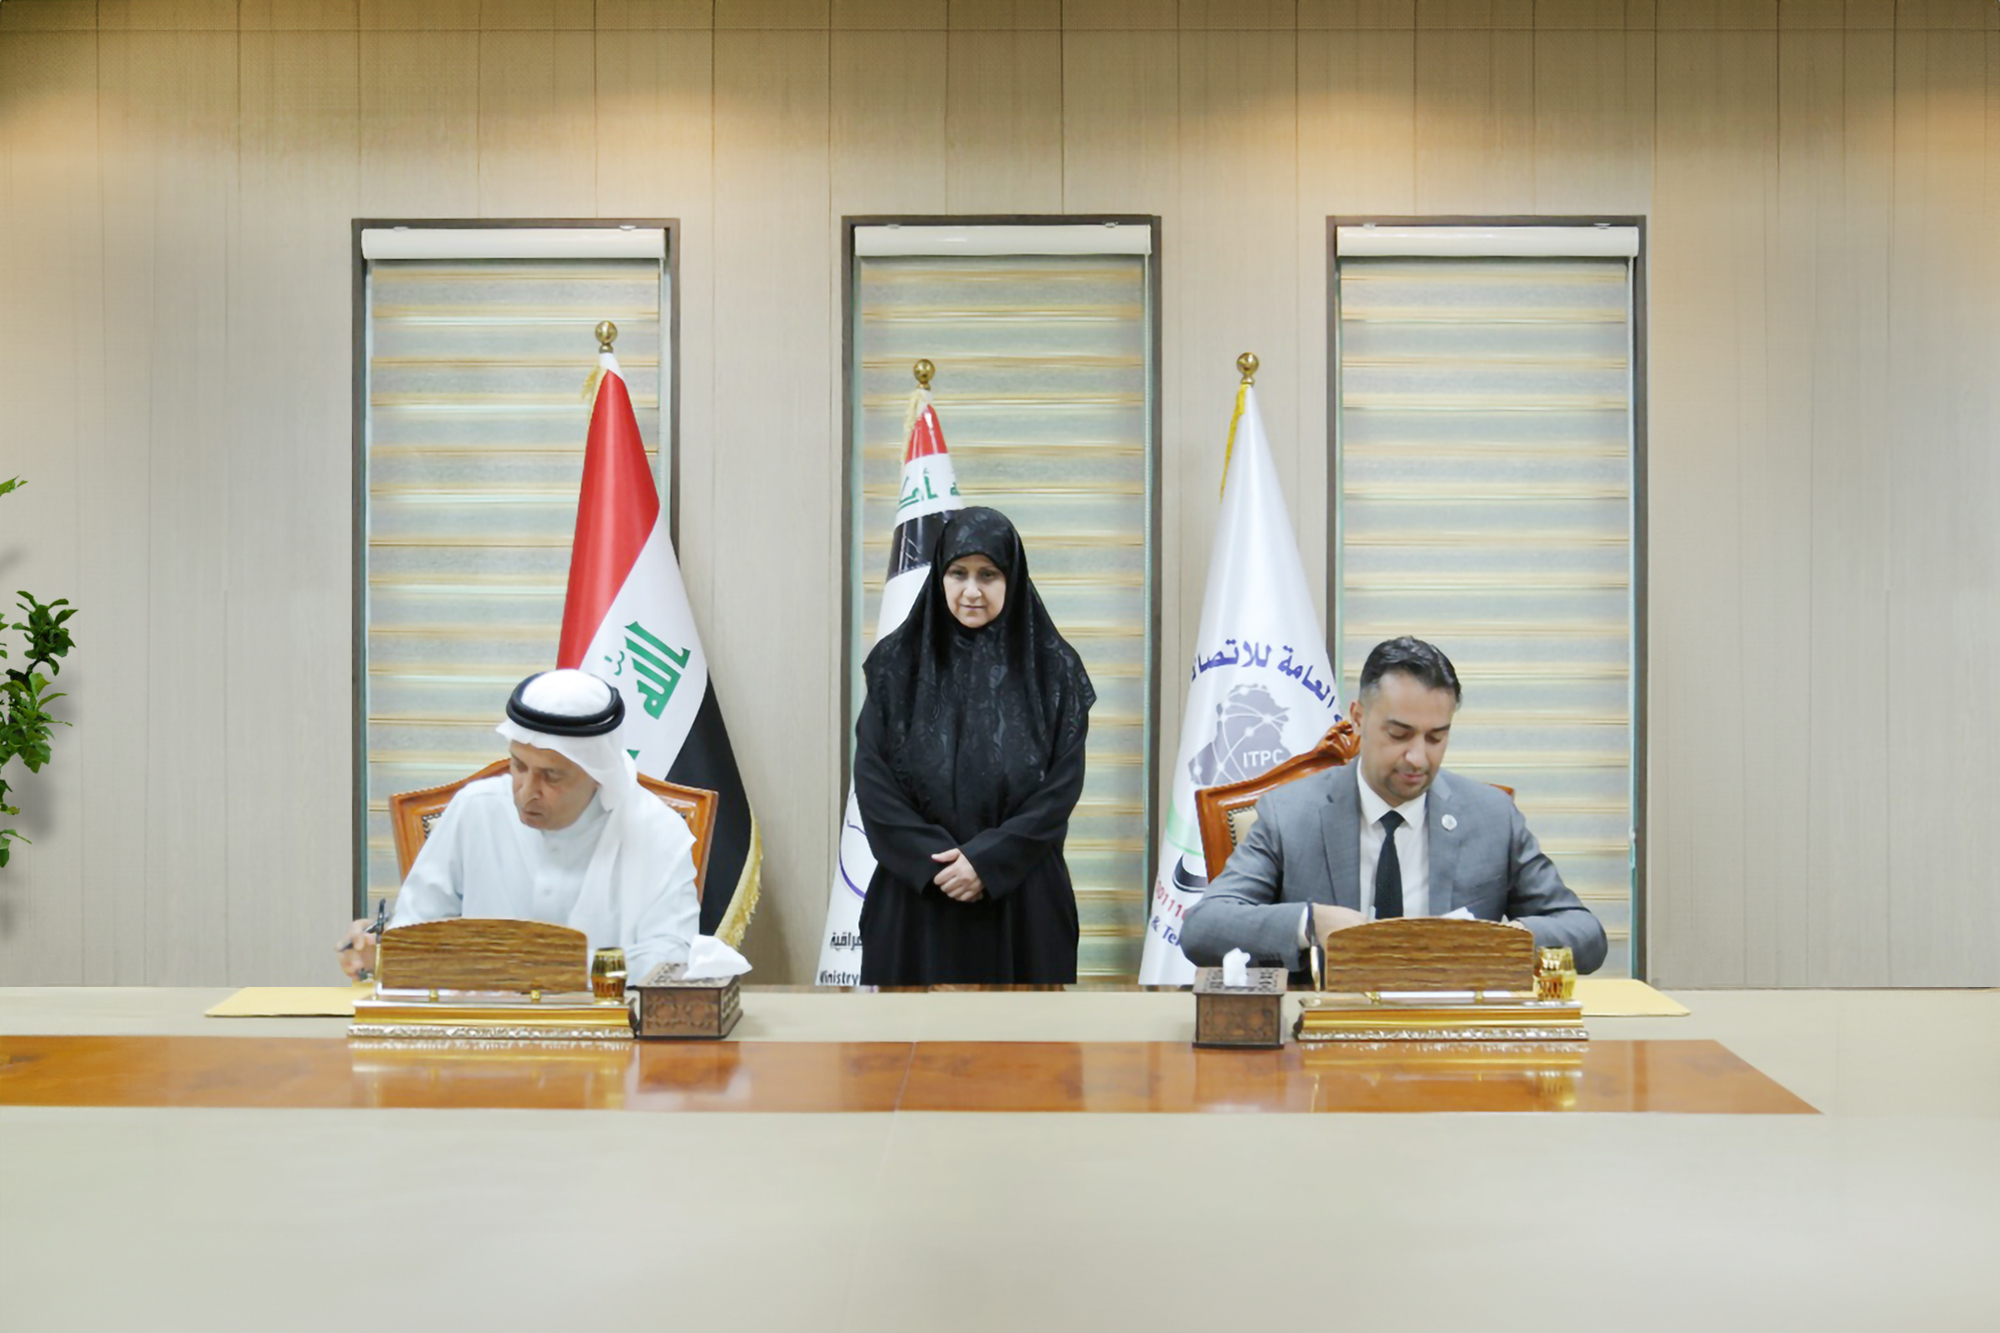 Zajil Telecom (Zajil Telecom, a wholly owned subsidiary in Kuwait of Kalaam Telecom Group), signed a long-term strategic agreement with the Iraqi Informatics & Telecommunication Public Company (ITPC) under the patronage of Her Excellency the Minister of Communications, Dr. Hiyam Al Yasiri. This agreement establishes "Kalaam Iraq Transit," the first official 100% terrestrial alternative route for large enterprises, hyperscalers, and global carriers to route their data traffic from the GCC to Europe transiting Iraq across Turkey.